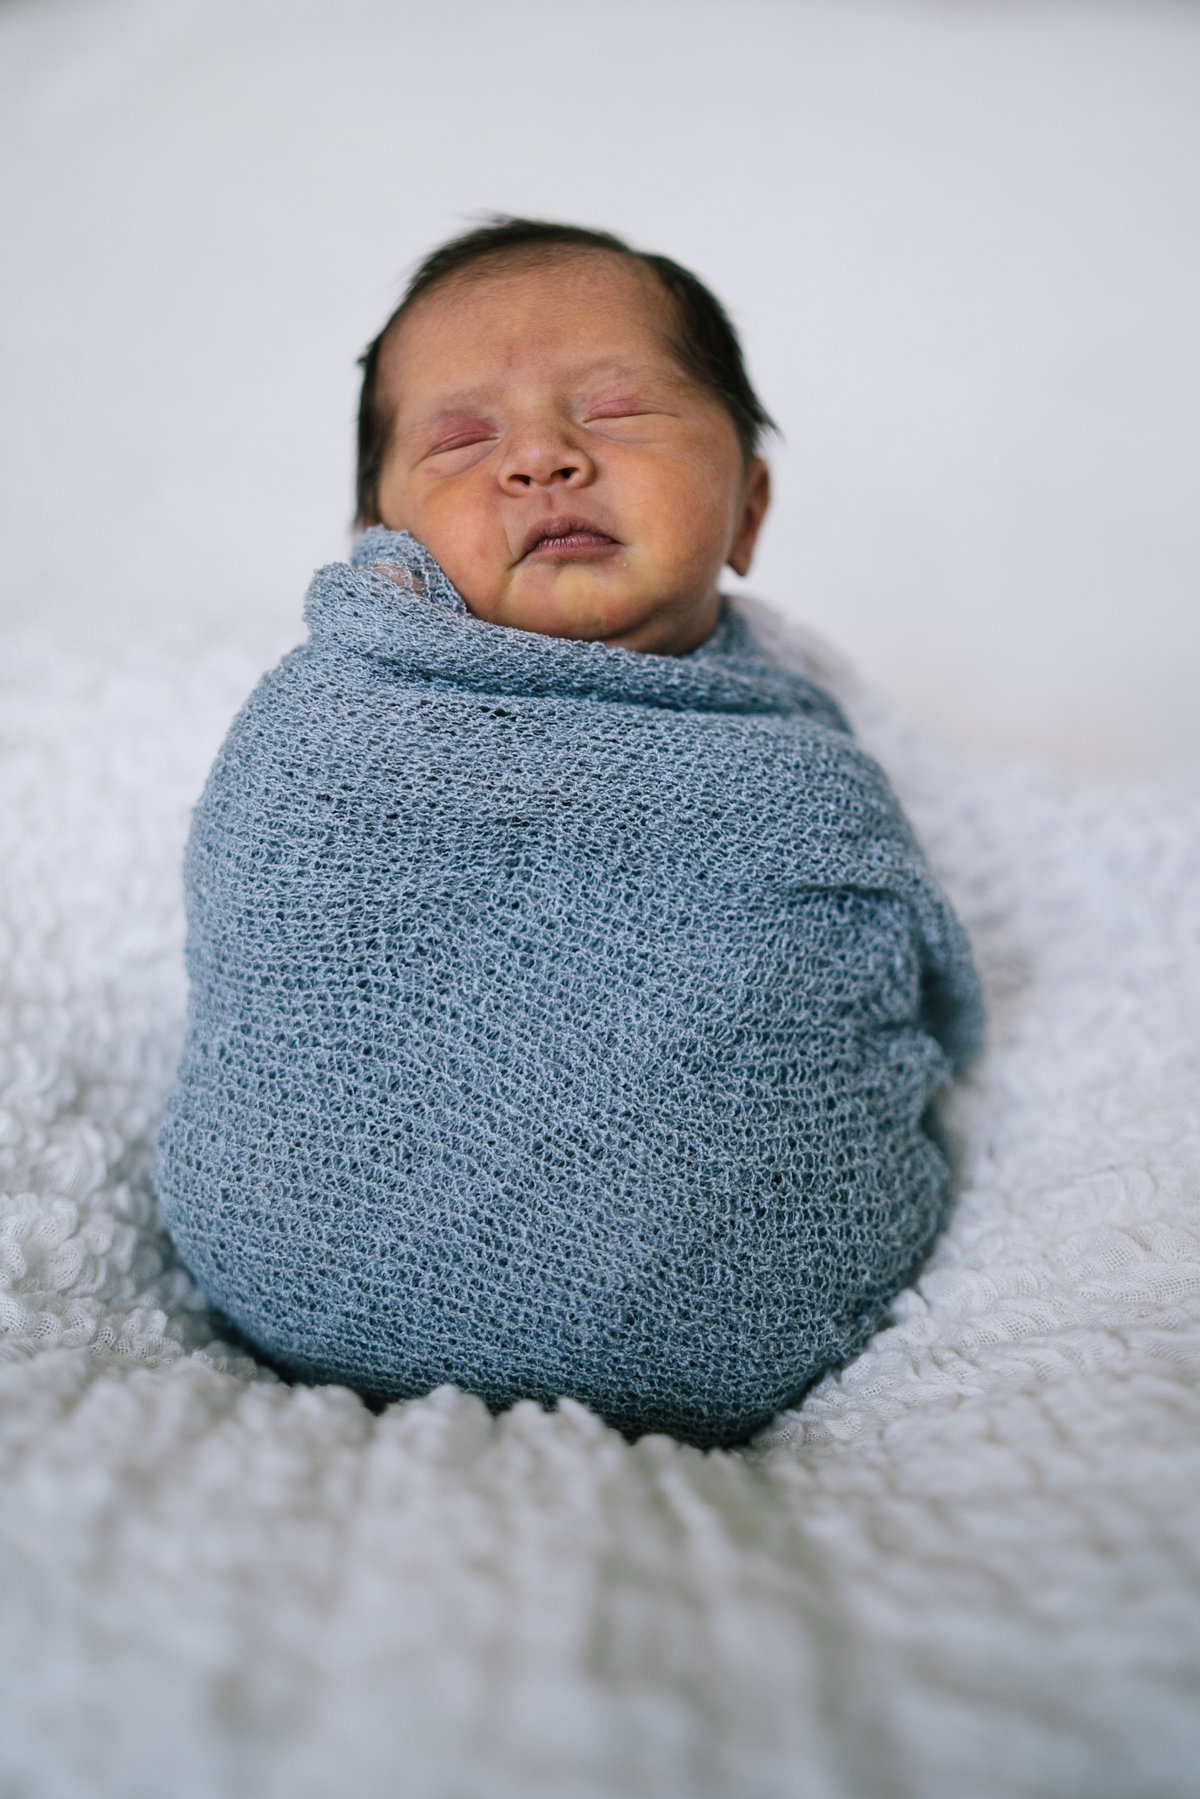 Newborn baby wrapped in cheesecloth blanket sitting on white blanket in San Antonio Photography studio.